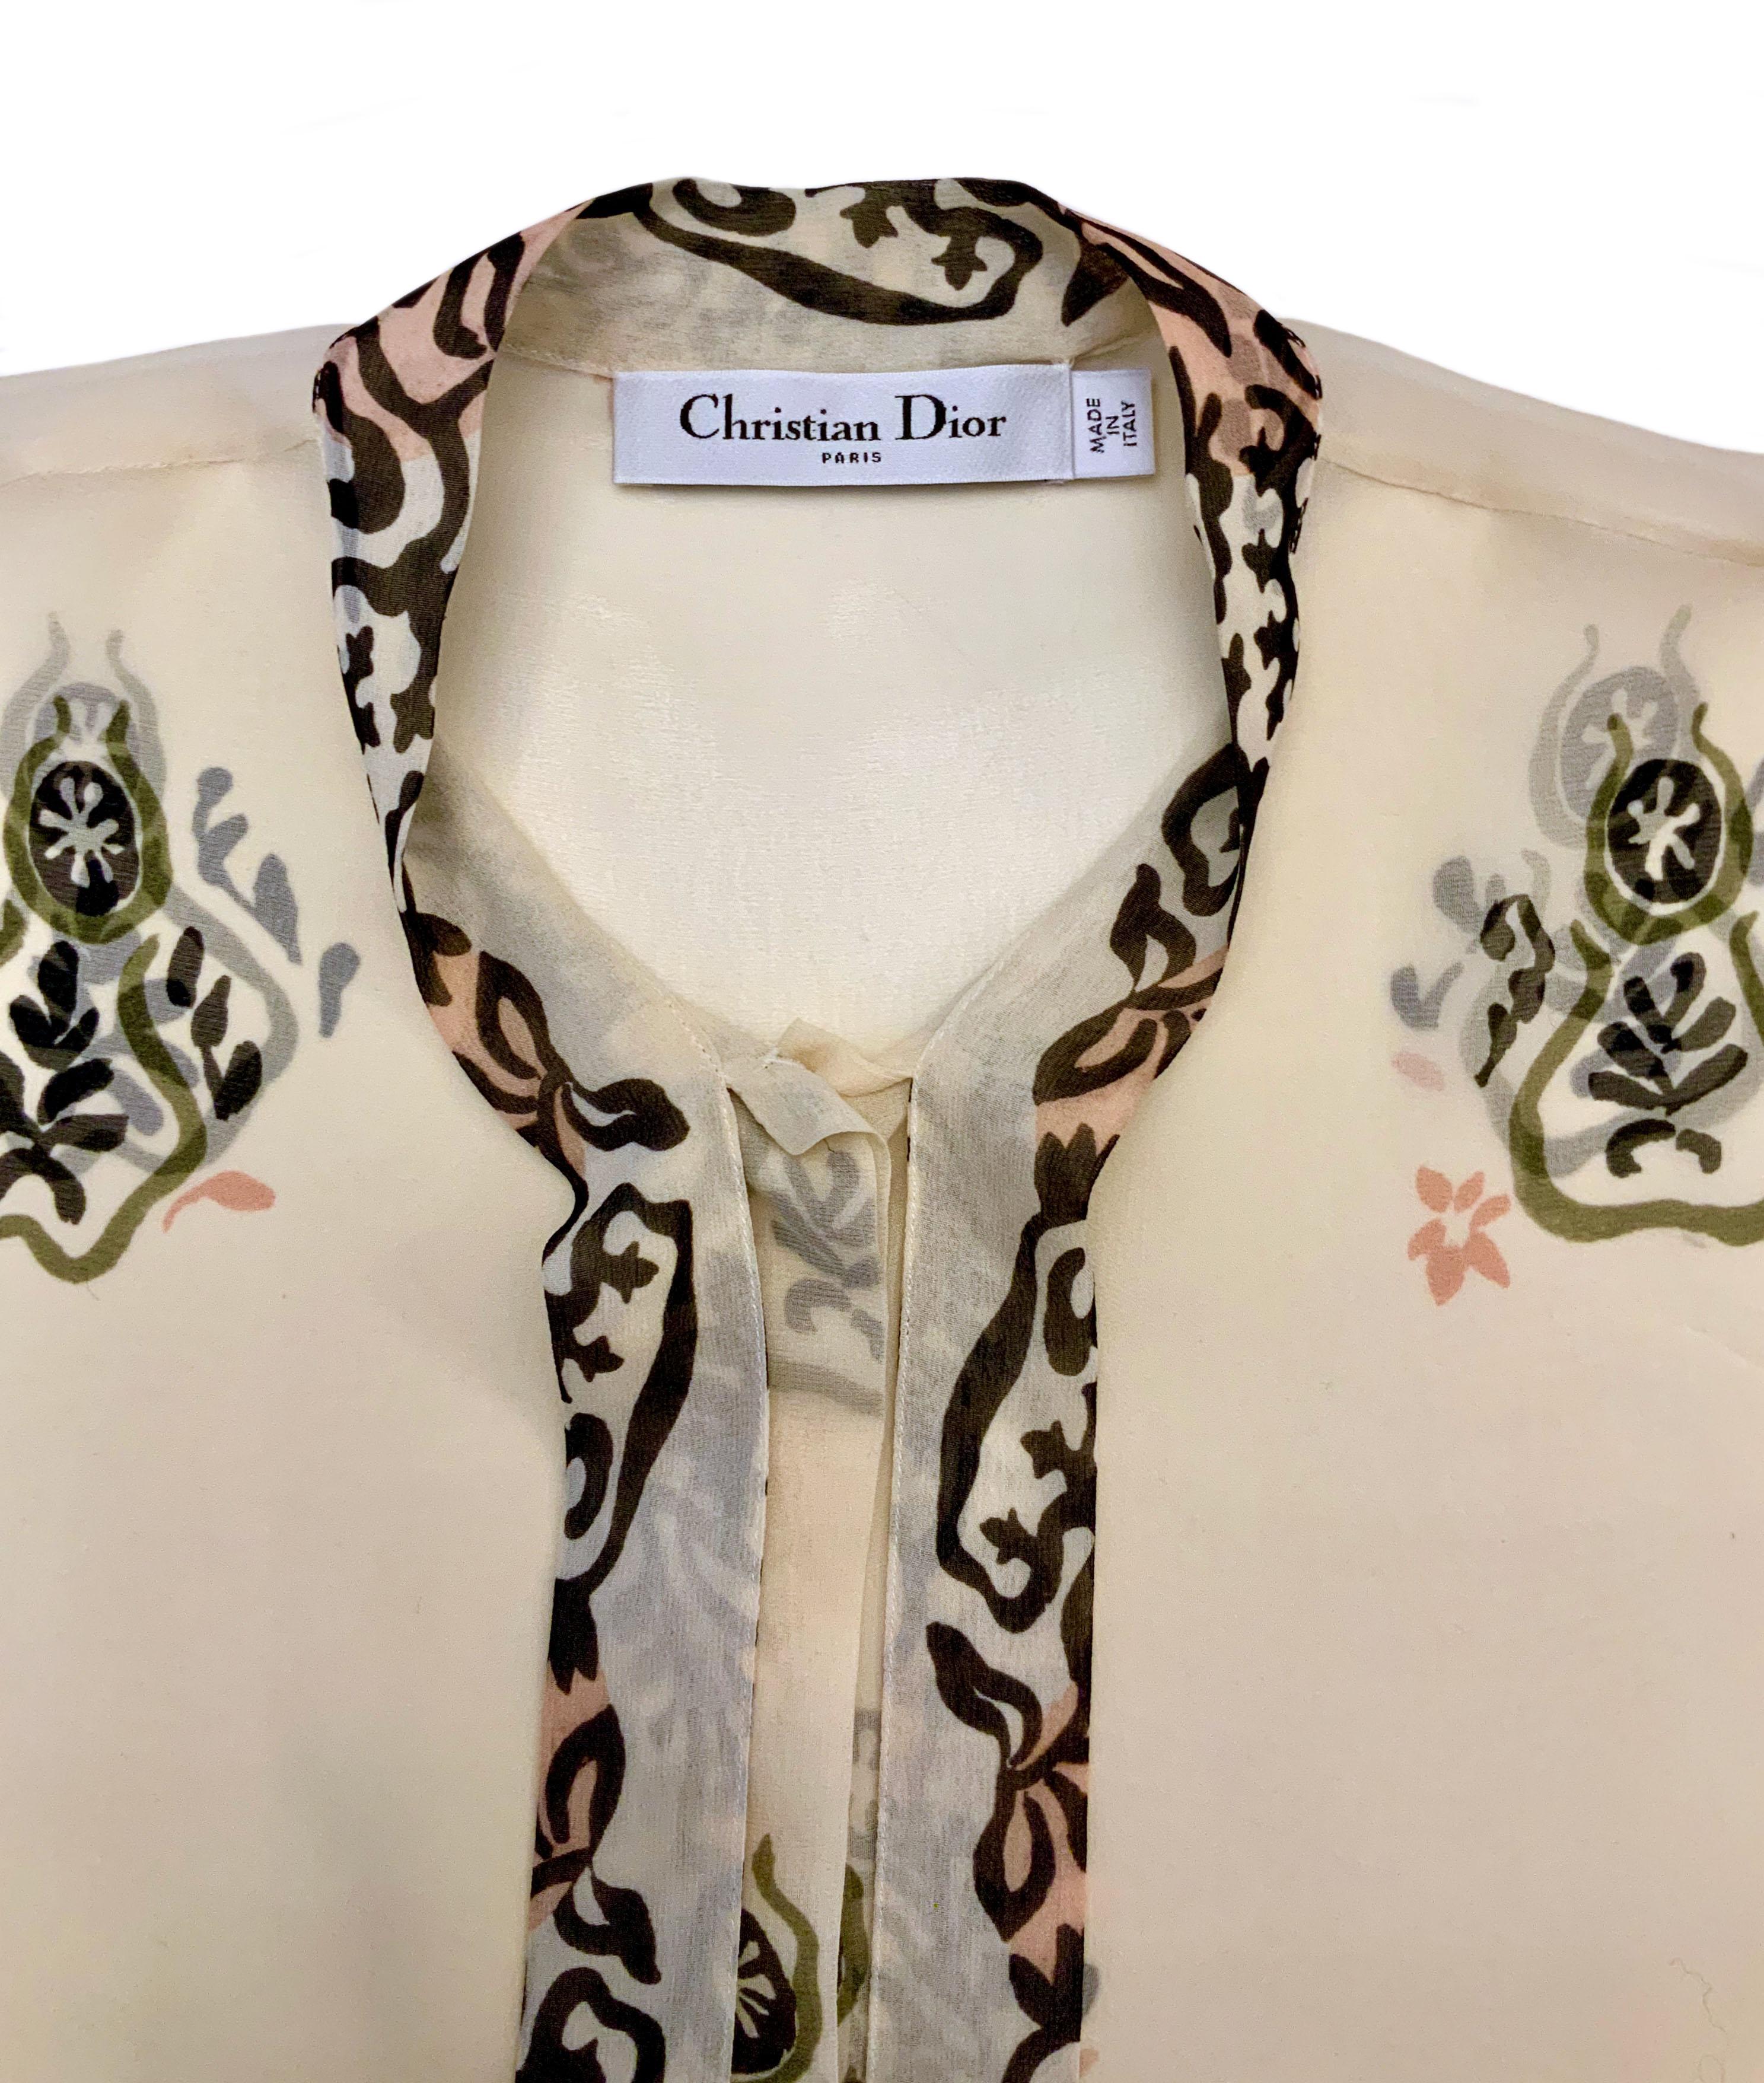 Inspired by the Navajo pattern in a delicate cream color, this pure silk blouse is part of the Pre Fall 2019 collection.
It can be worn with the matching cardigan or simply on its own !
Long sleeves and 